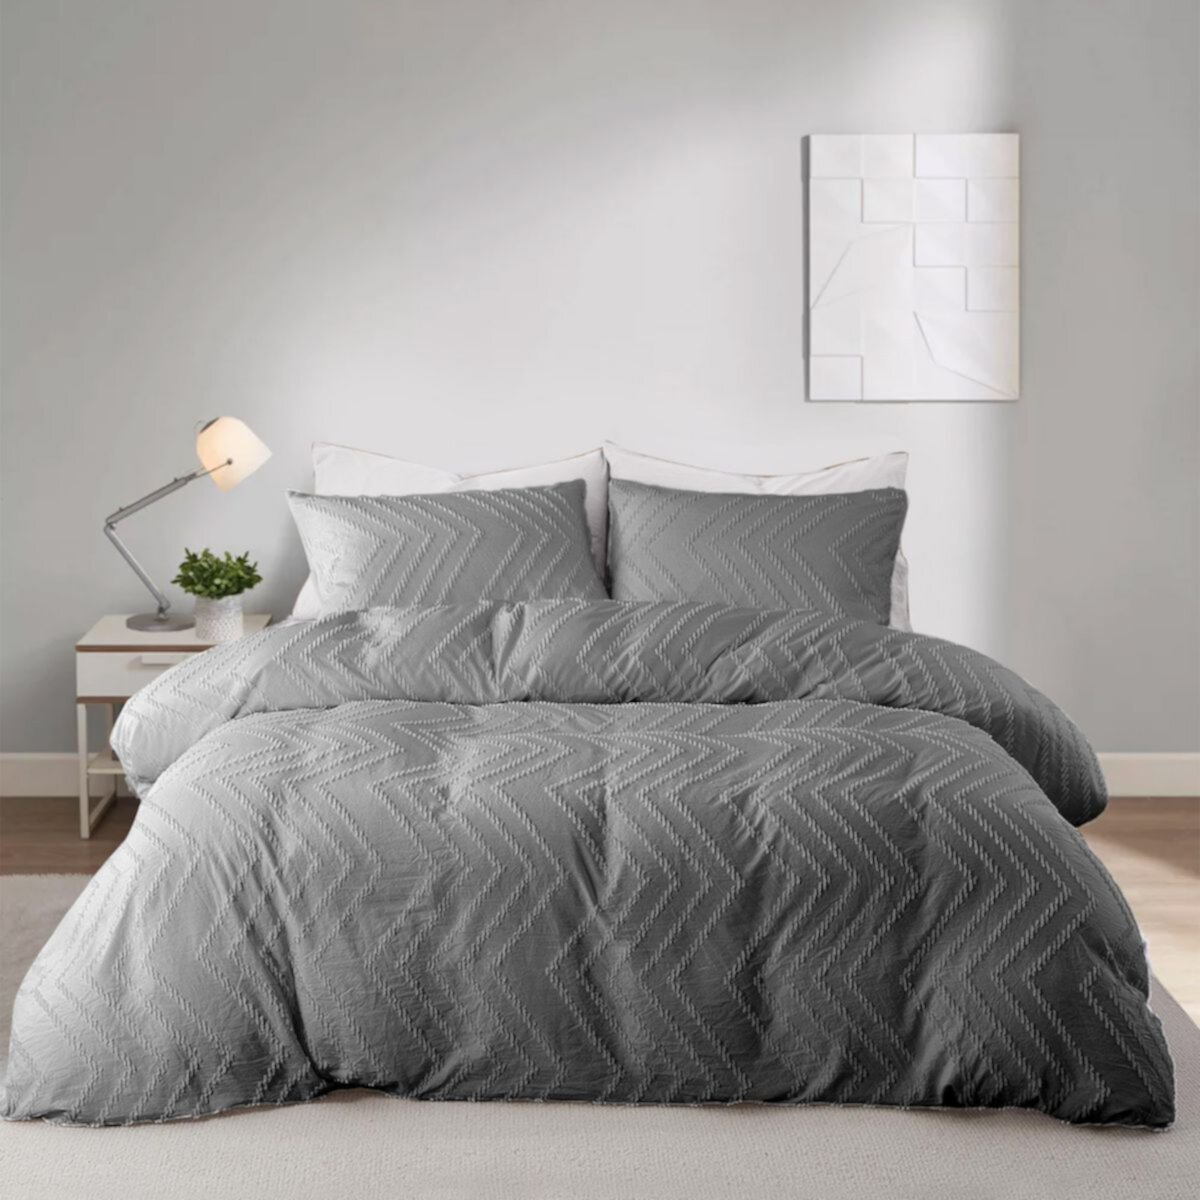 Unikome Soft Solid Clipped Duvet Cover Set with Corner Ties UNIKOME